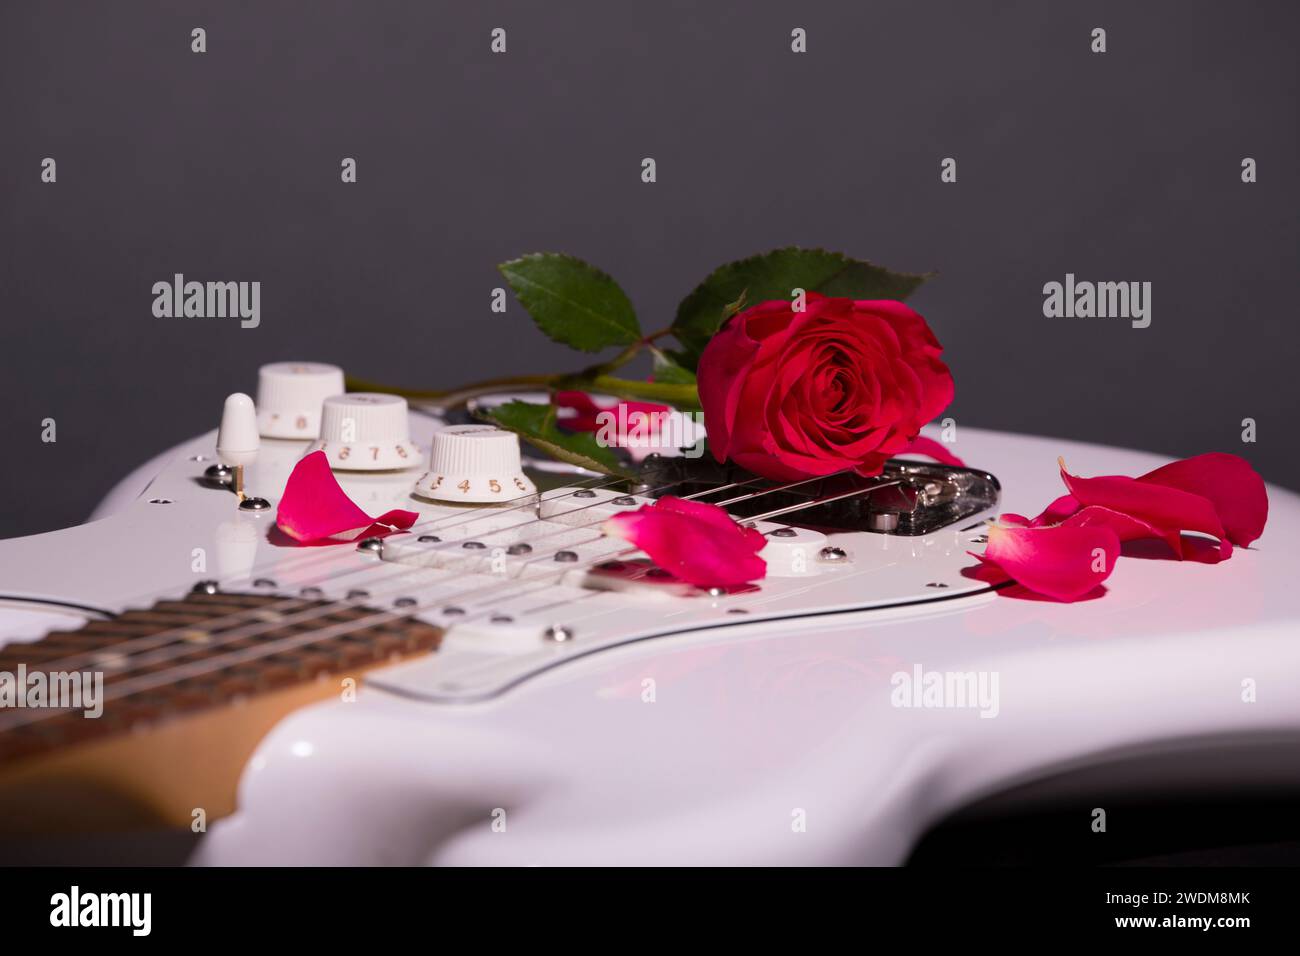 Red Rose and Rose Petals on White Electric Guitar Stock Photo